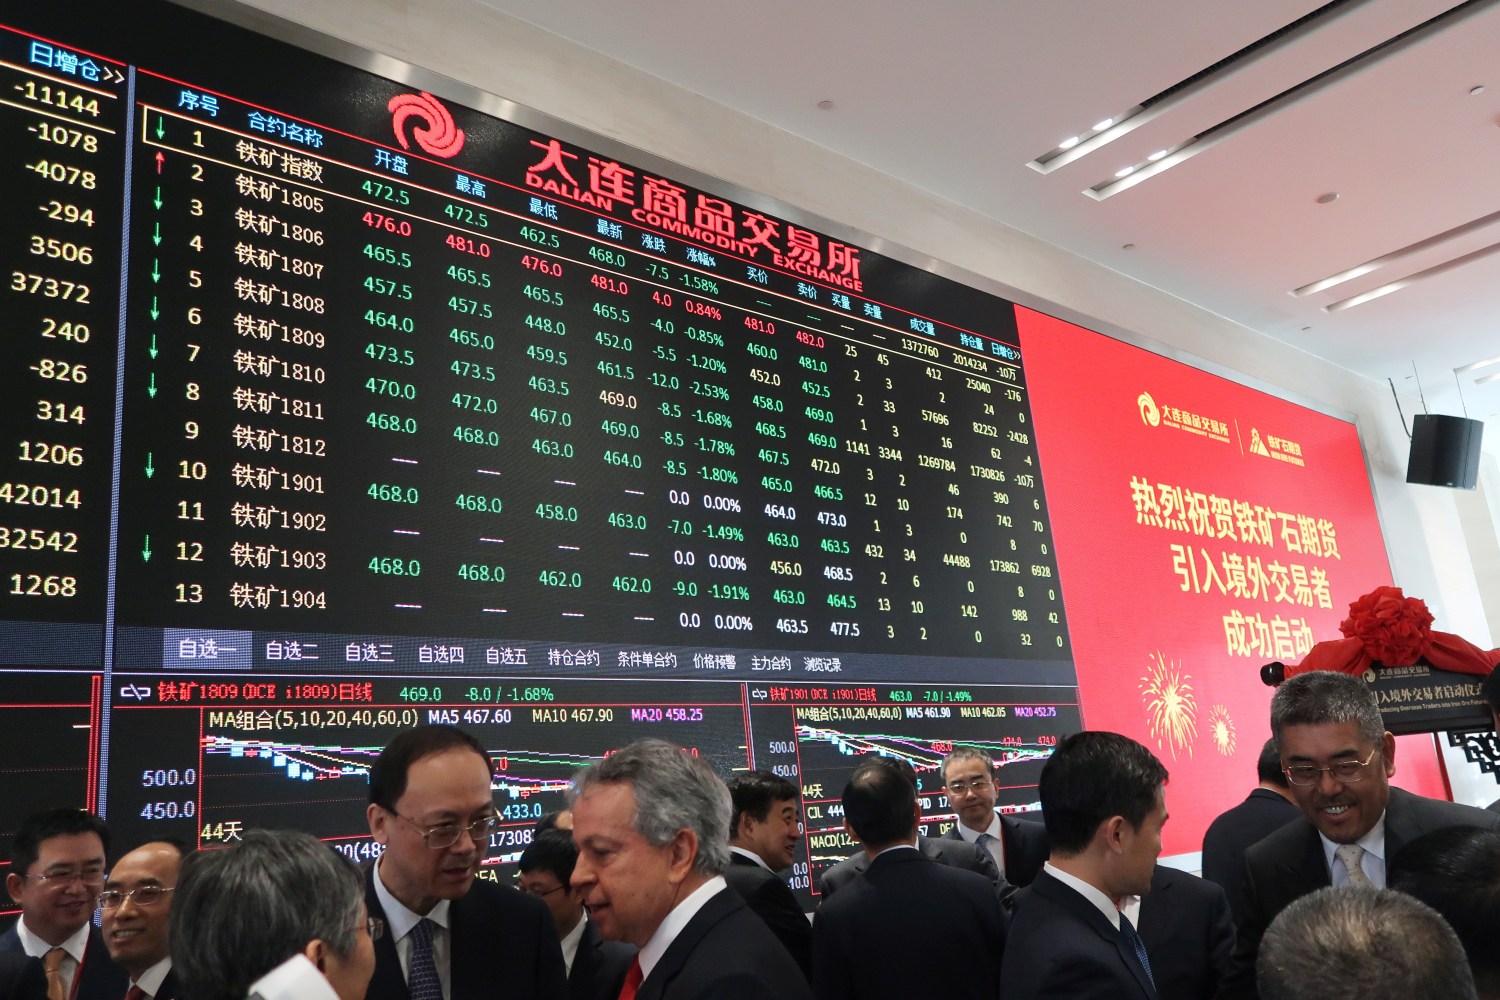 People attend a ceremony marking the opening of iron ore futures to foreign investors, at Dalian Commodity Exchange in Dalian, Liaoning province, China May 4, 2018. REUTERS/Muyu Xu - RC1FC60EC240